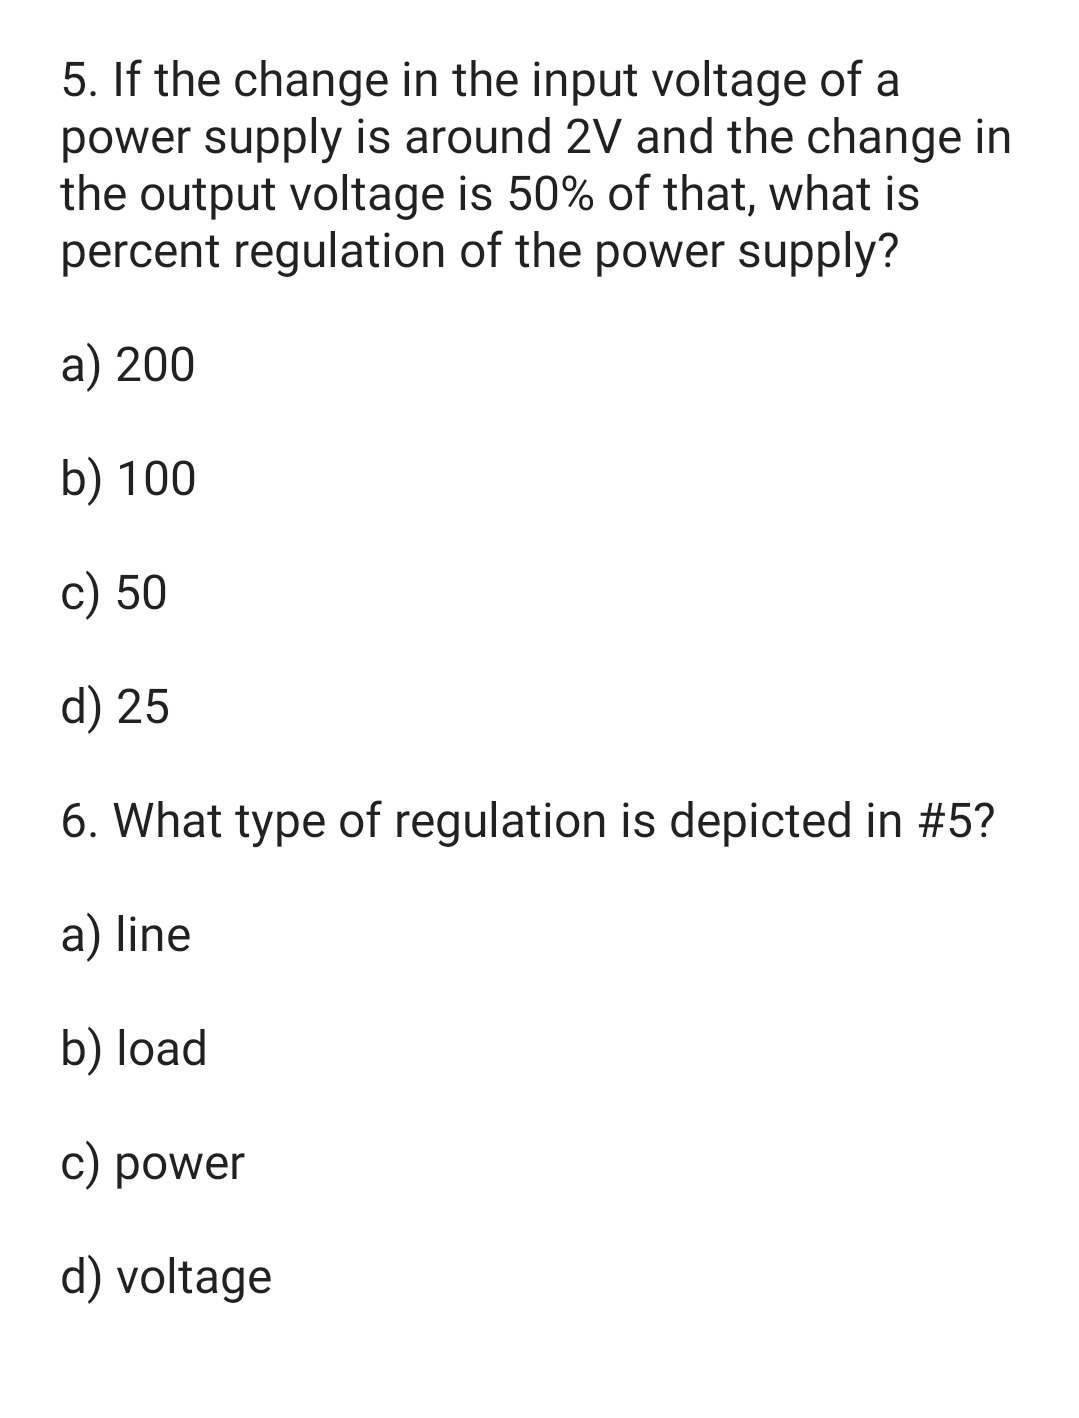 5. If the change in the input voltage of a
power supply is around 2V and the change in
the output voltage is 50% of that, what is
percent regulation of the power supply?
a) 200
b) 100
c) 50
d) 25
6. What type of regulation is depicted in #5?
a) line
b) load
c) power
d) voltage
